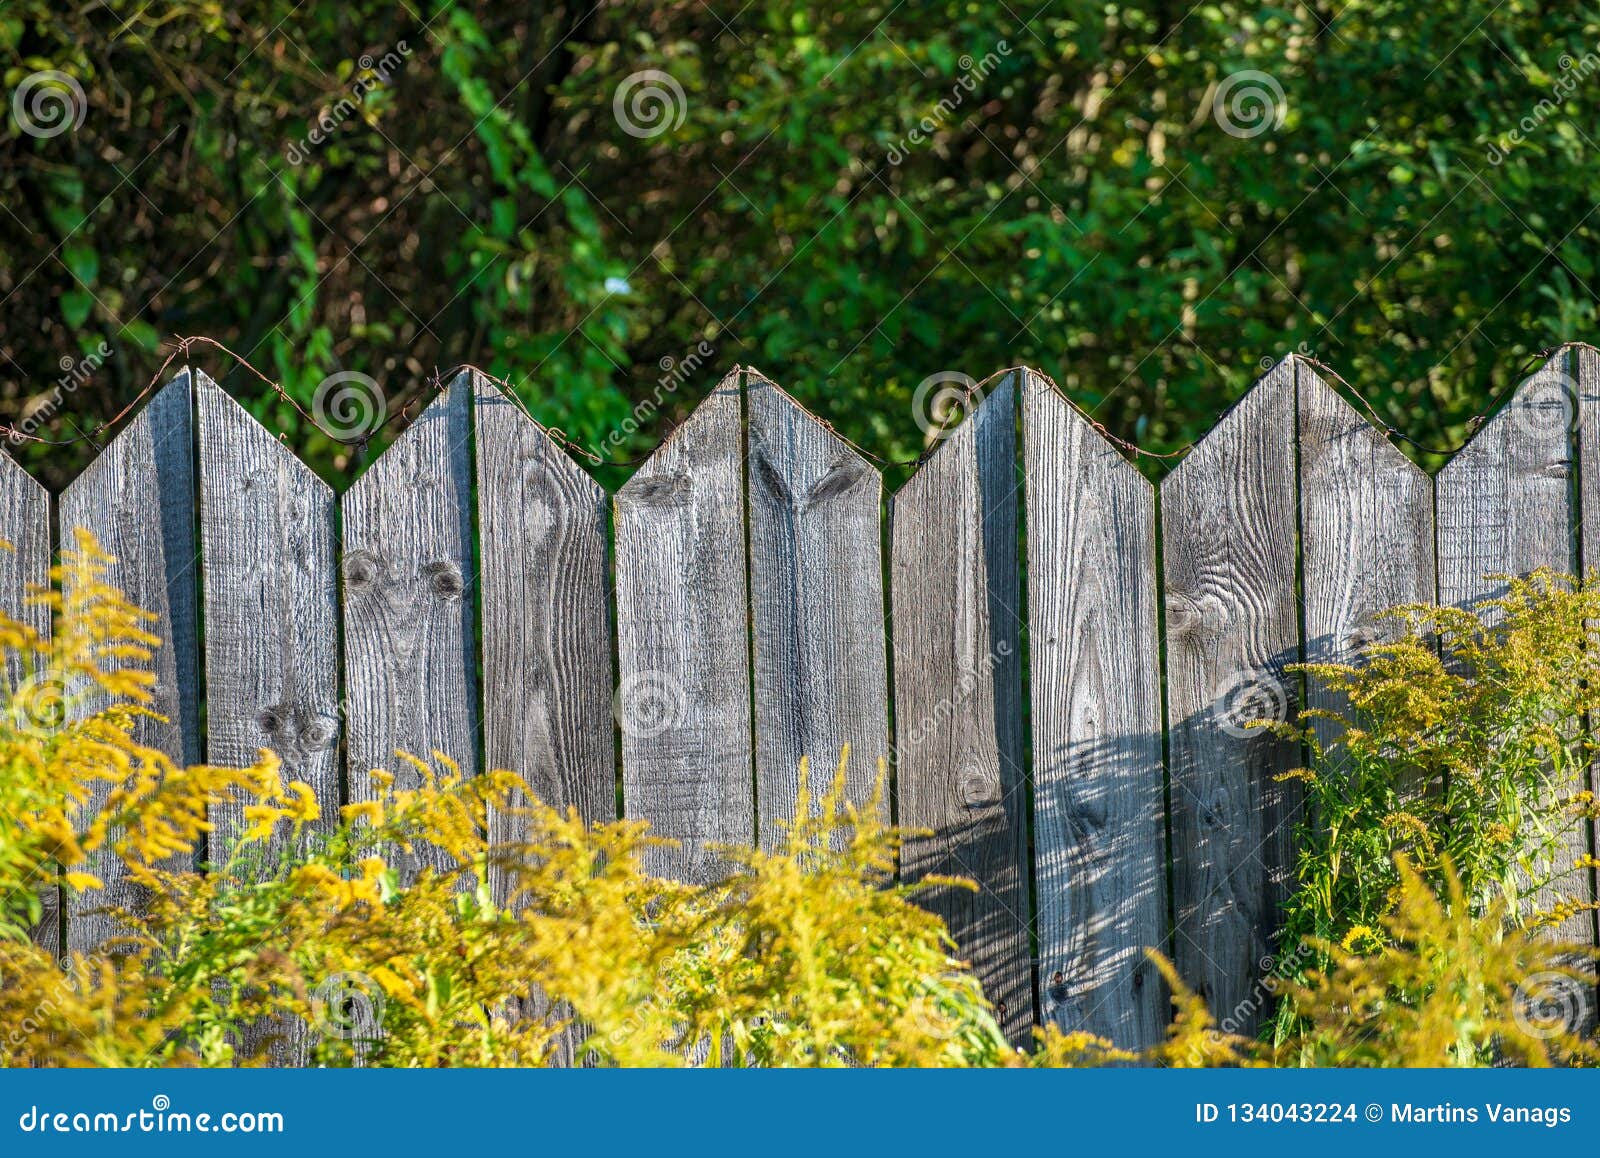 212 Barbed Wire Top Old Wall Photos - Free  Royalty-Free Stock Photos from  Dreamstime